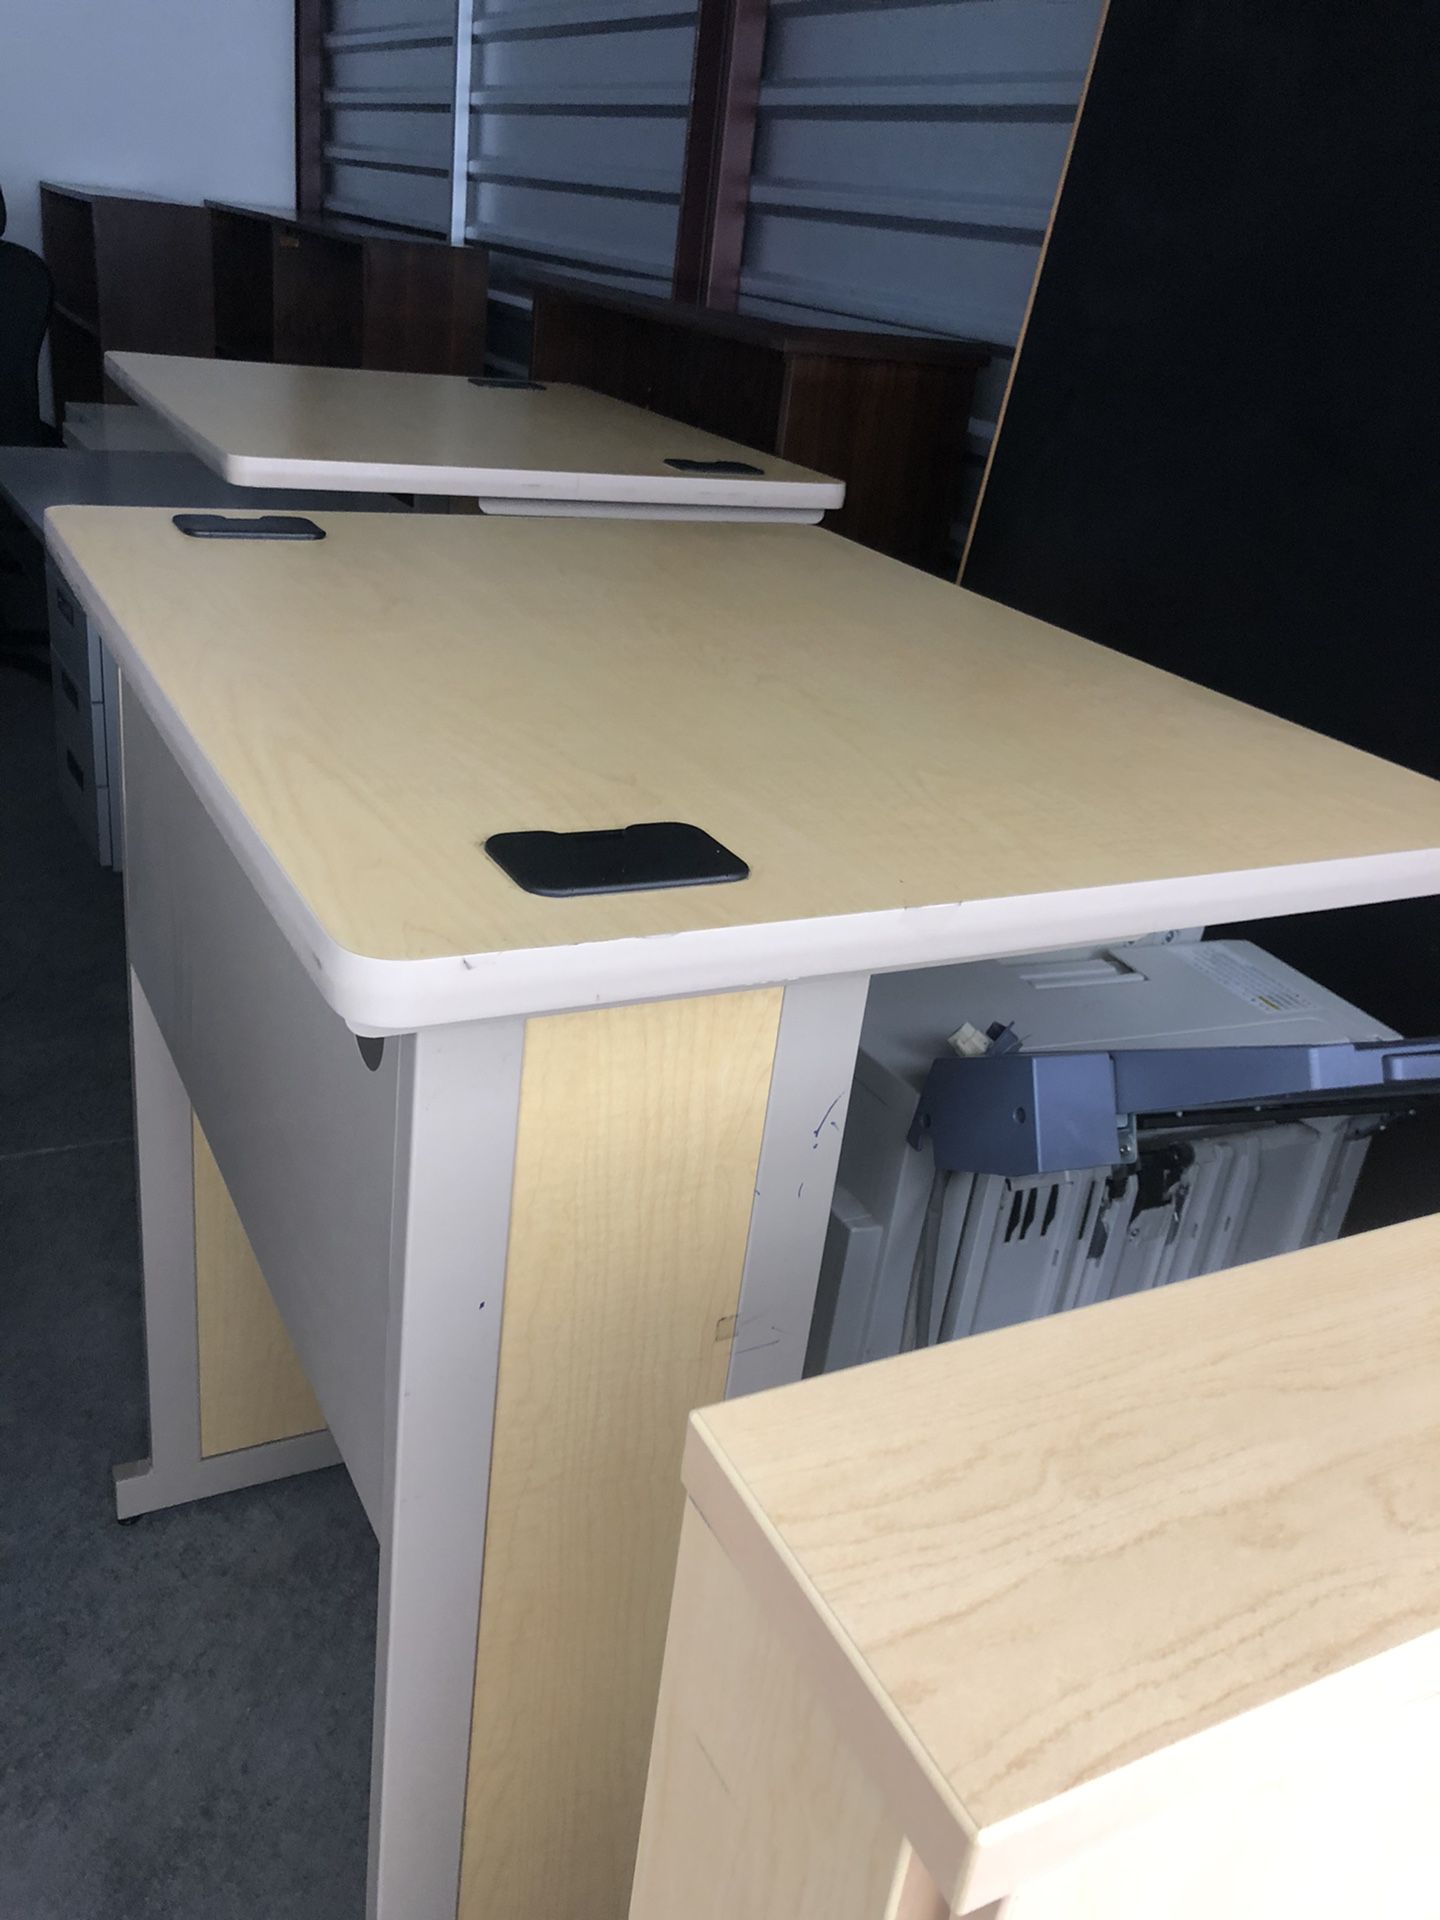 4 student/ computer standing desks in excellent condition 48x30 price per one table